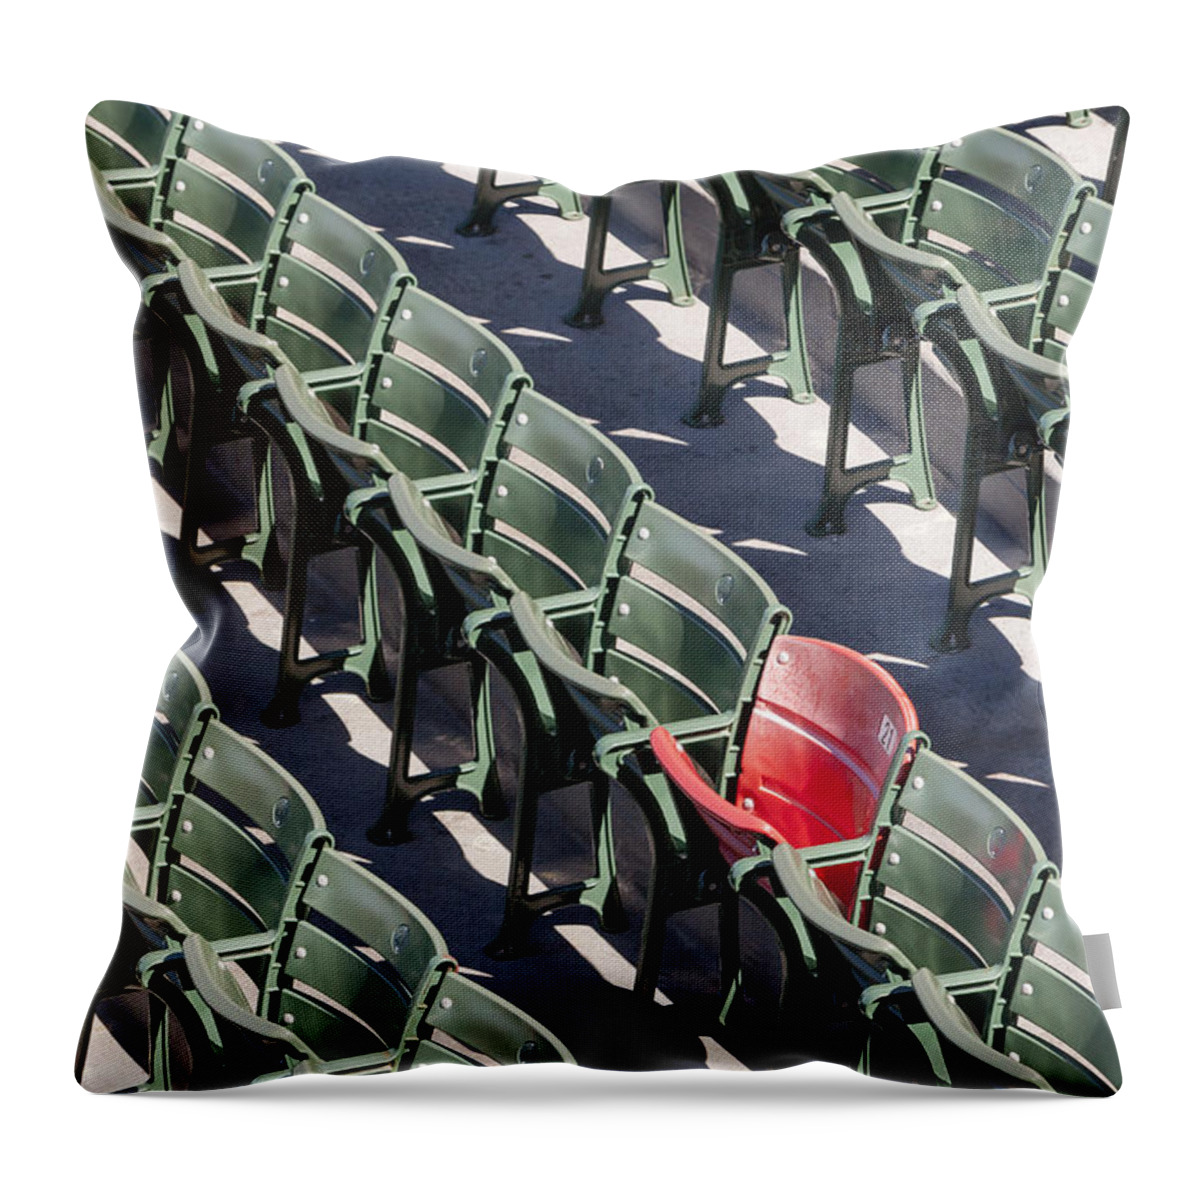 #21 Throw Pillow featuring the photograph Lone Red Number 21 Fenway Park by Susan Candelario